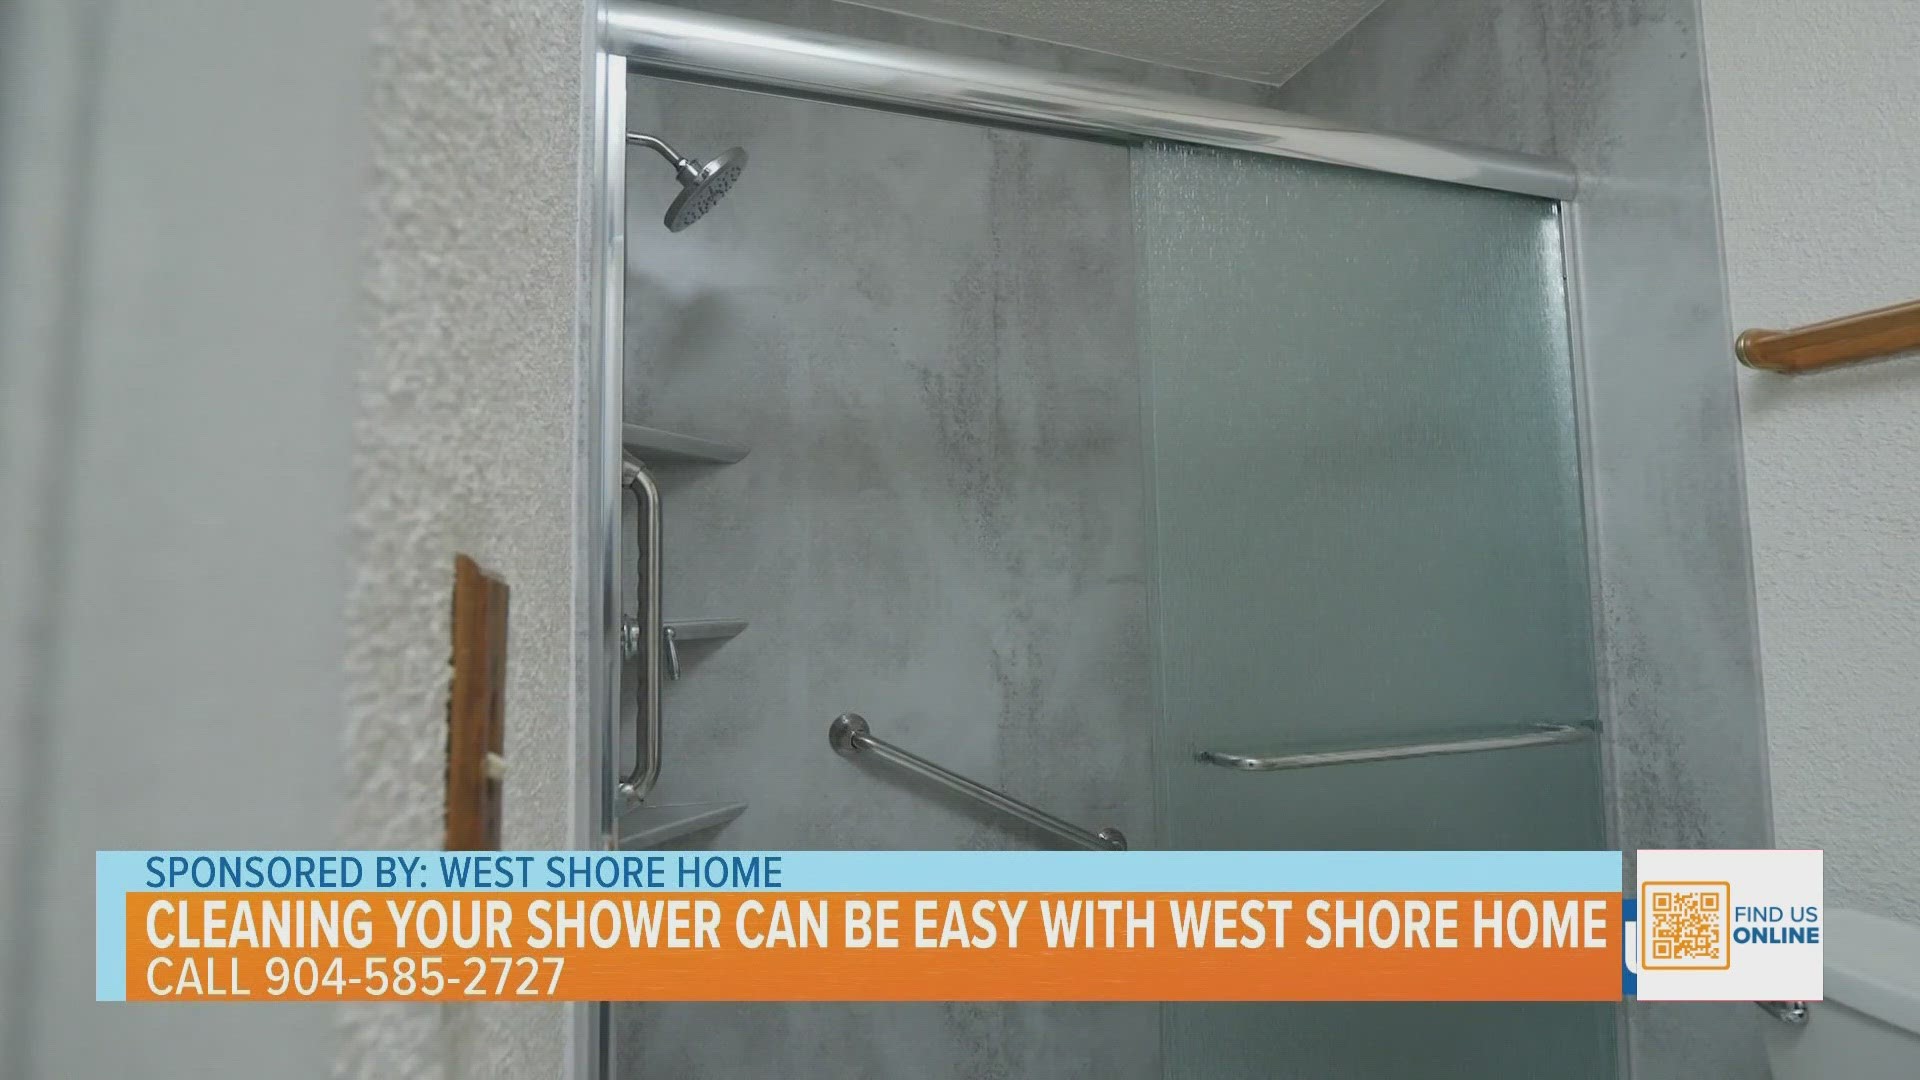 For more information on West Shore Home and the products and services they offer, please visit www.westshorehome.com